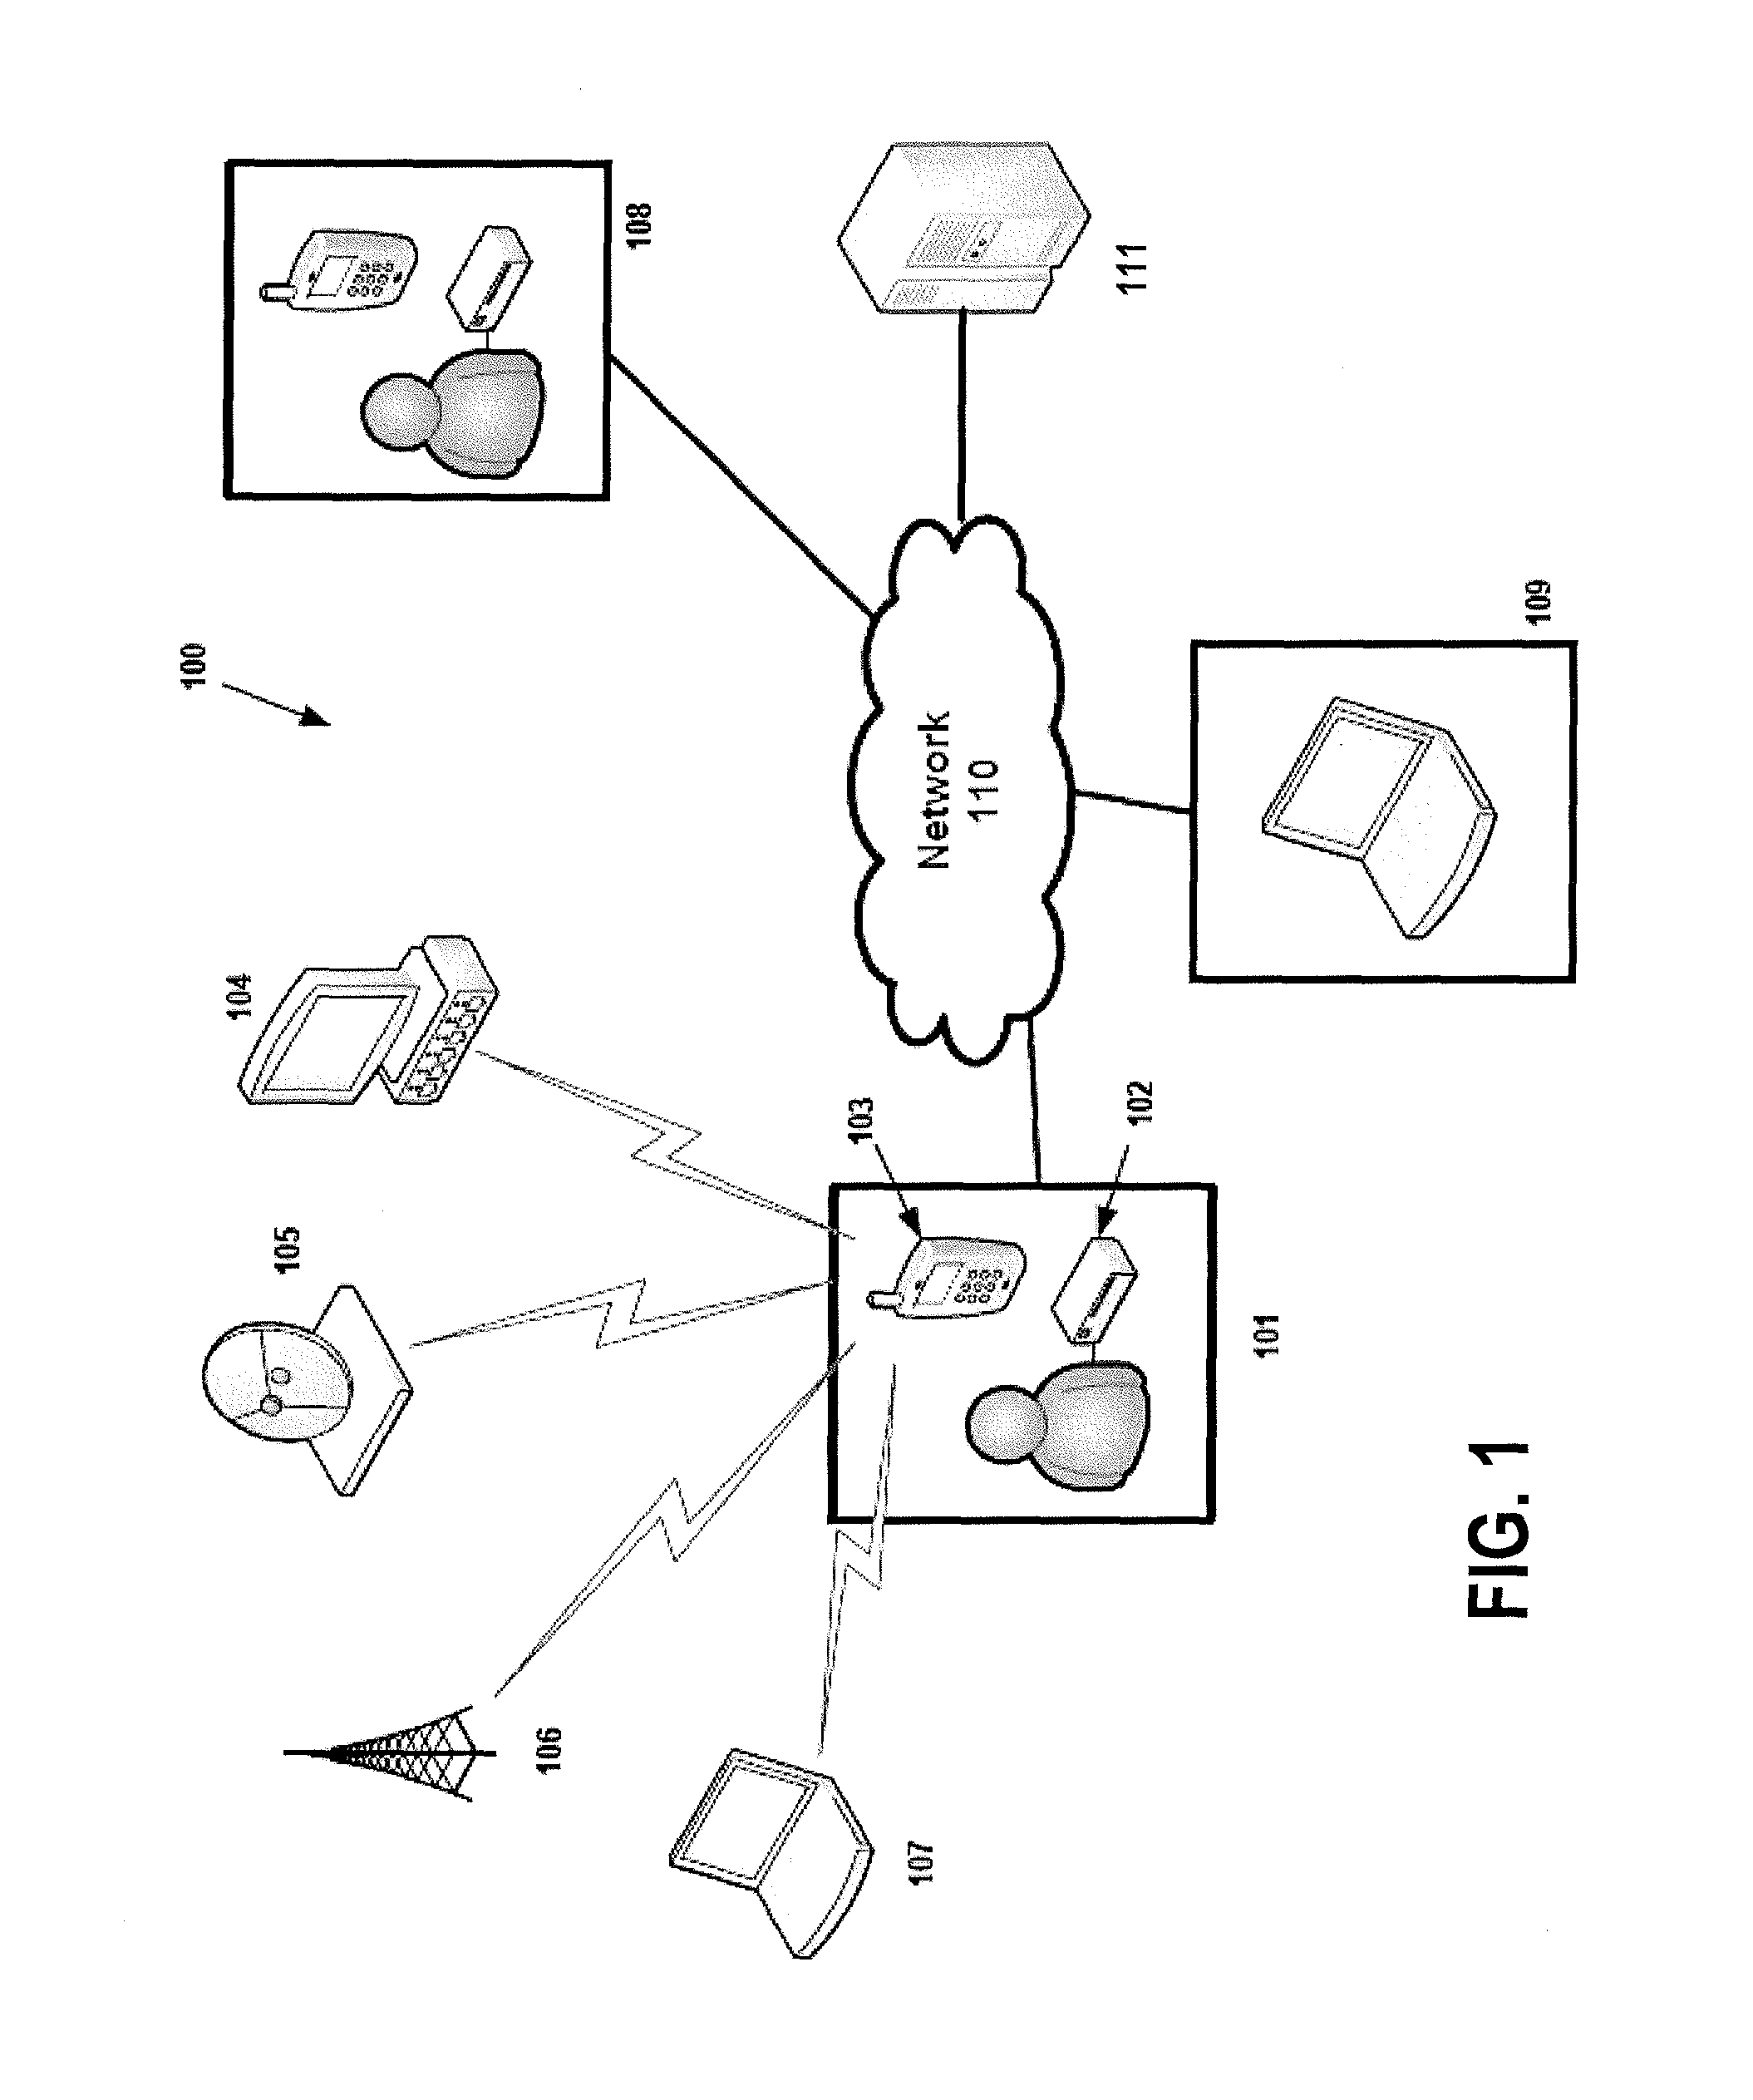 System and Method for Peer-to-Peer Distribution of Media Exposure Data